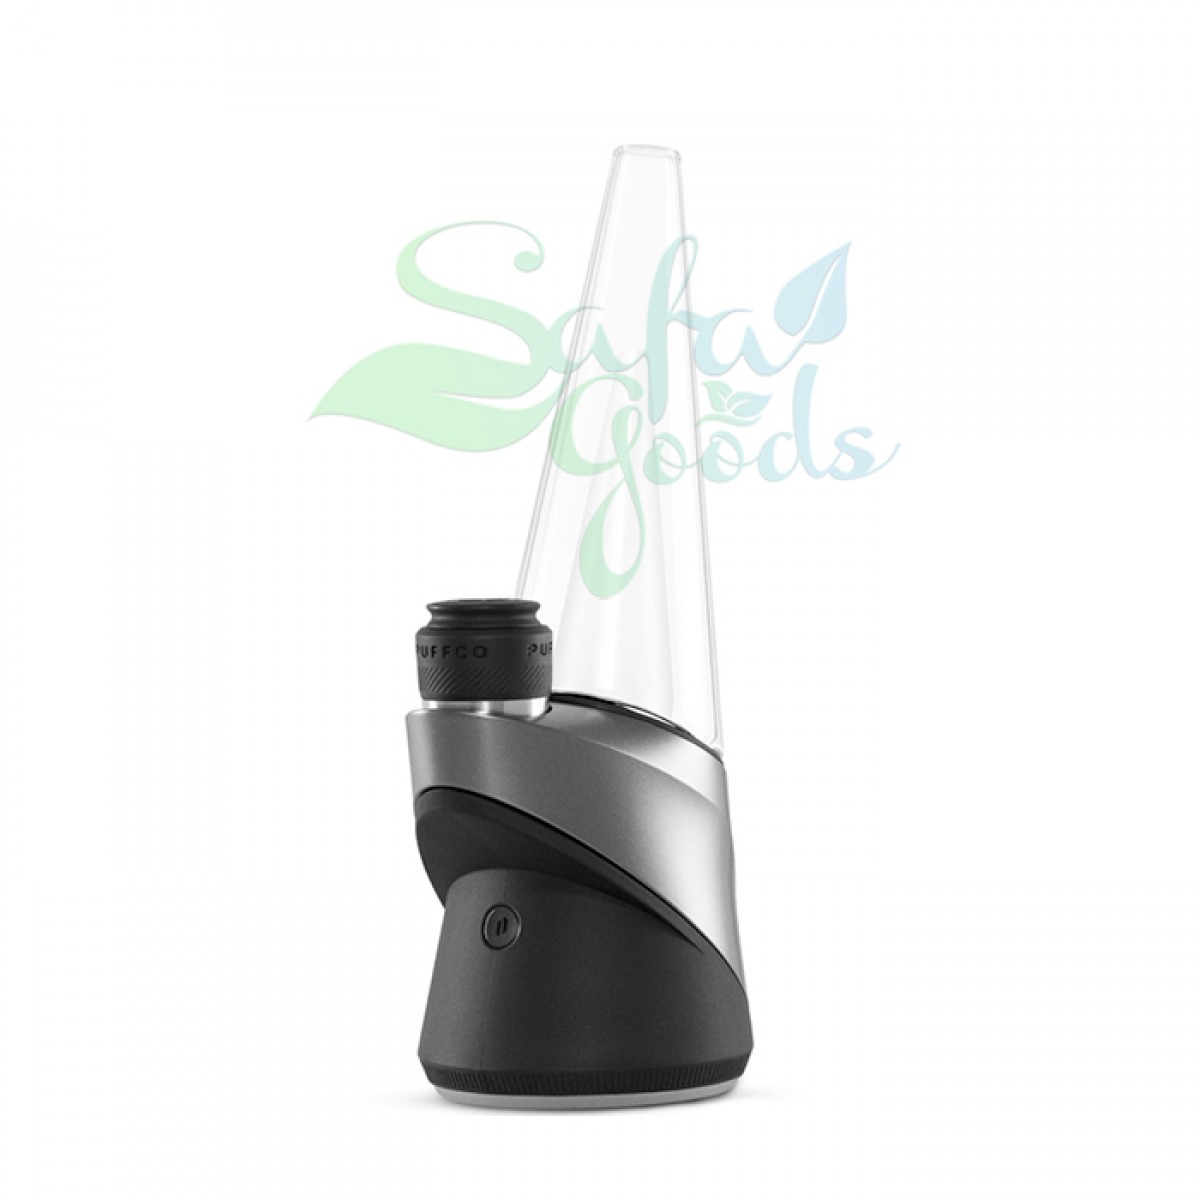 Puffco Peak Pro - Portable Electronic Concentrate Vaporizer